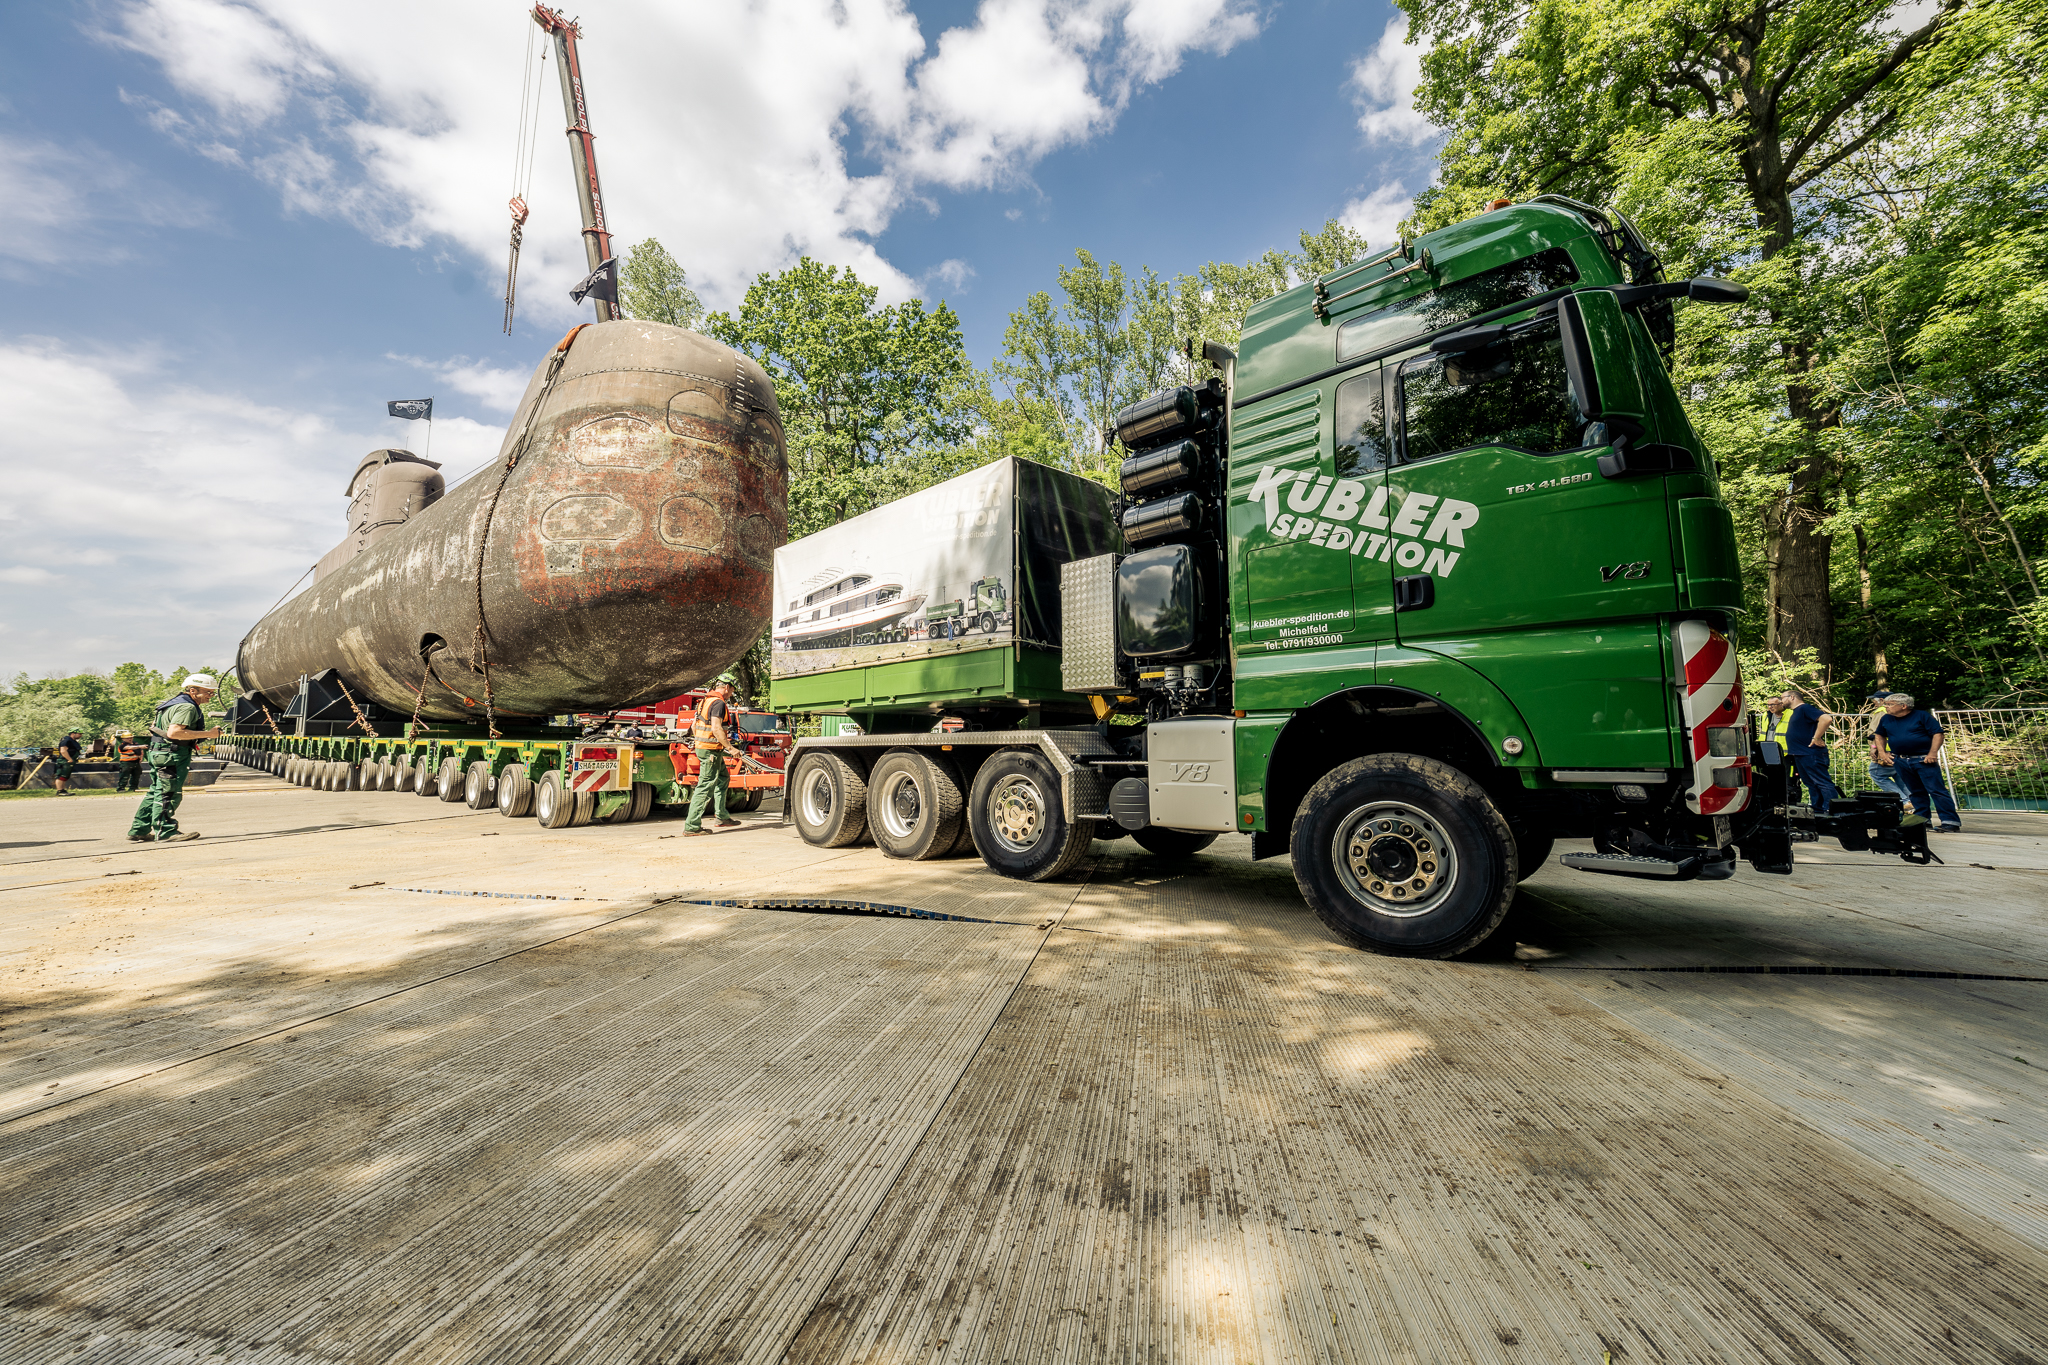 On a 30-axle vehicle, the colossus moved millimetre by millimetre towards solid ground.